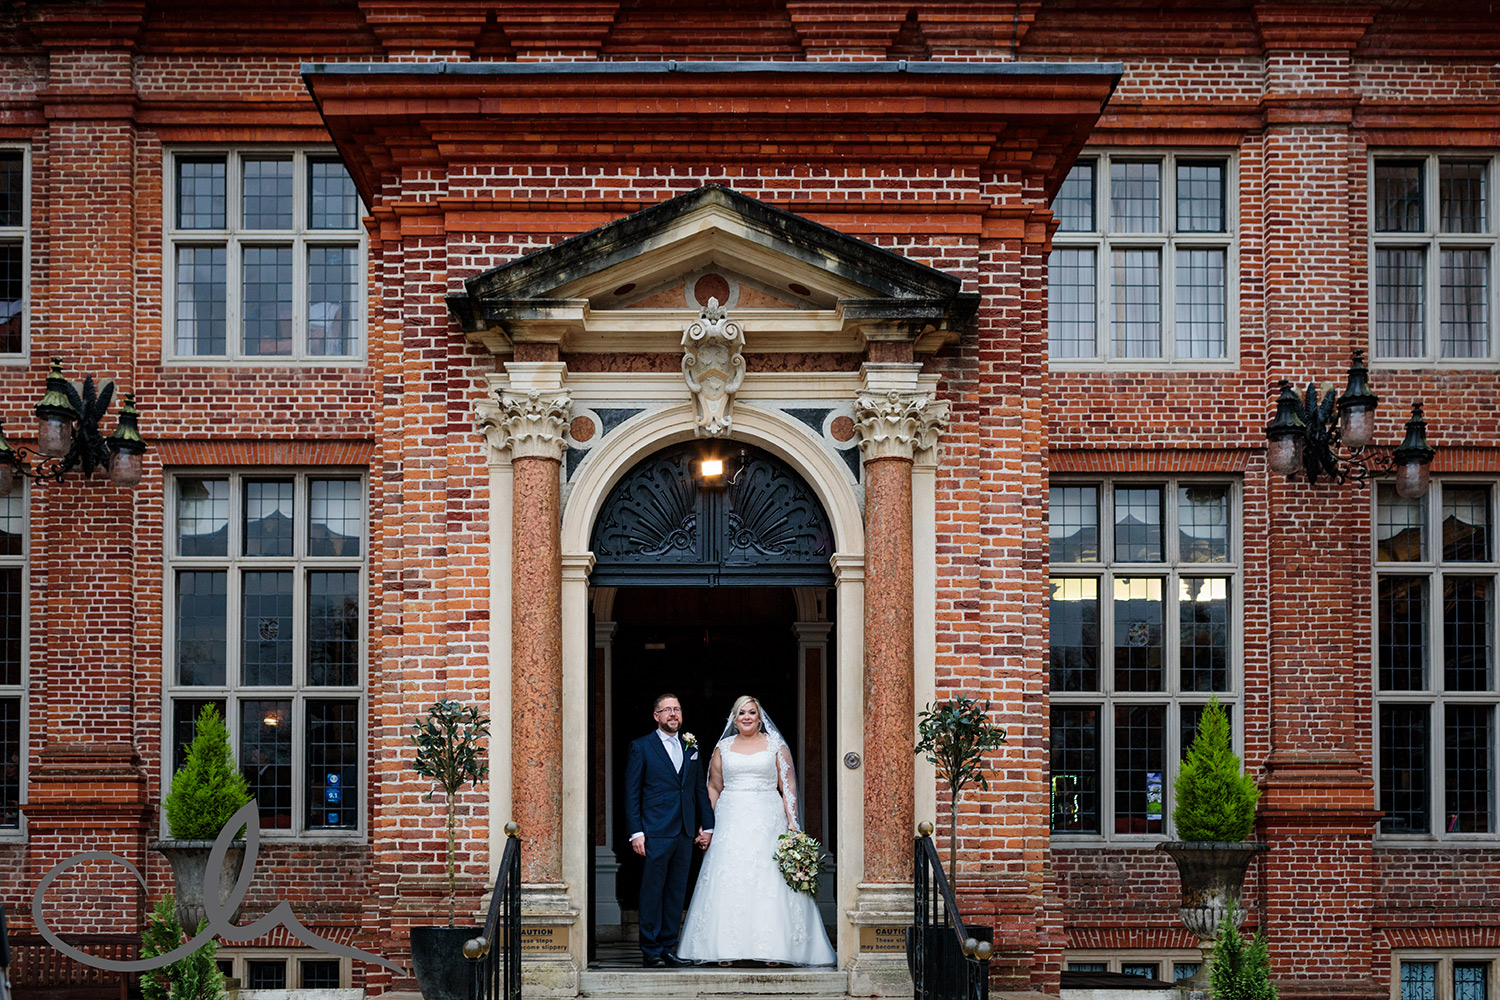 Newly weds have their portrait taken in front of Broome Park Wedding Venue Kent